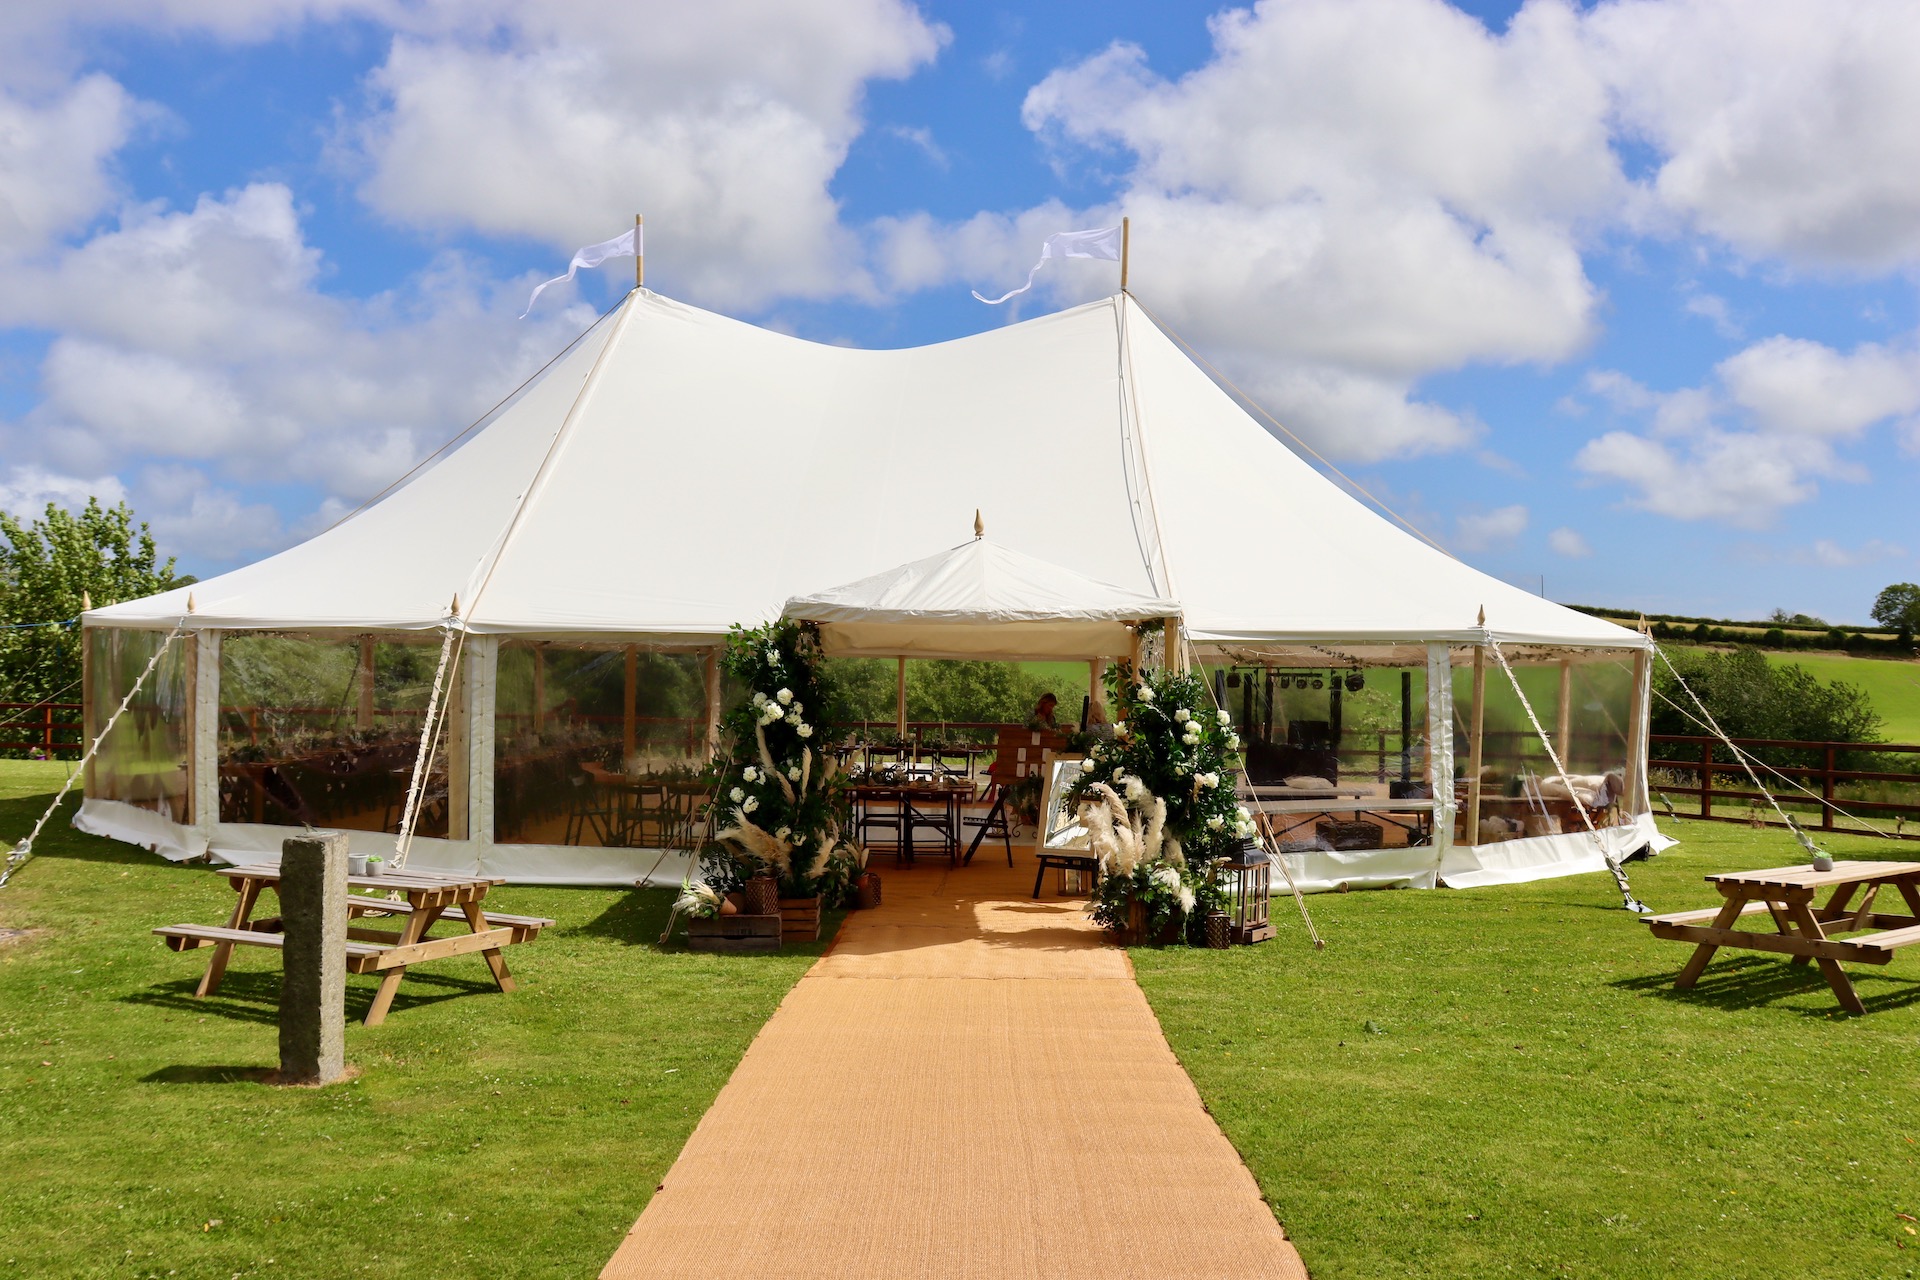 Summer wedding featuring our traditional pole marquee and an entrance canopy